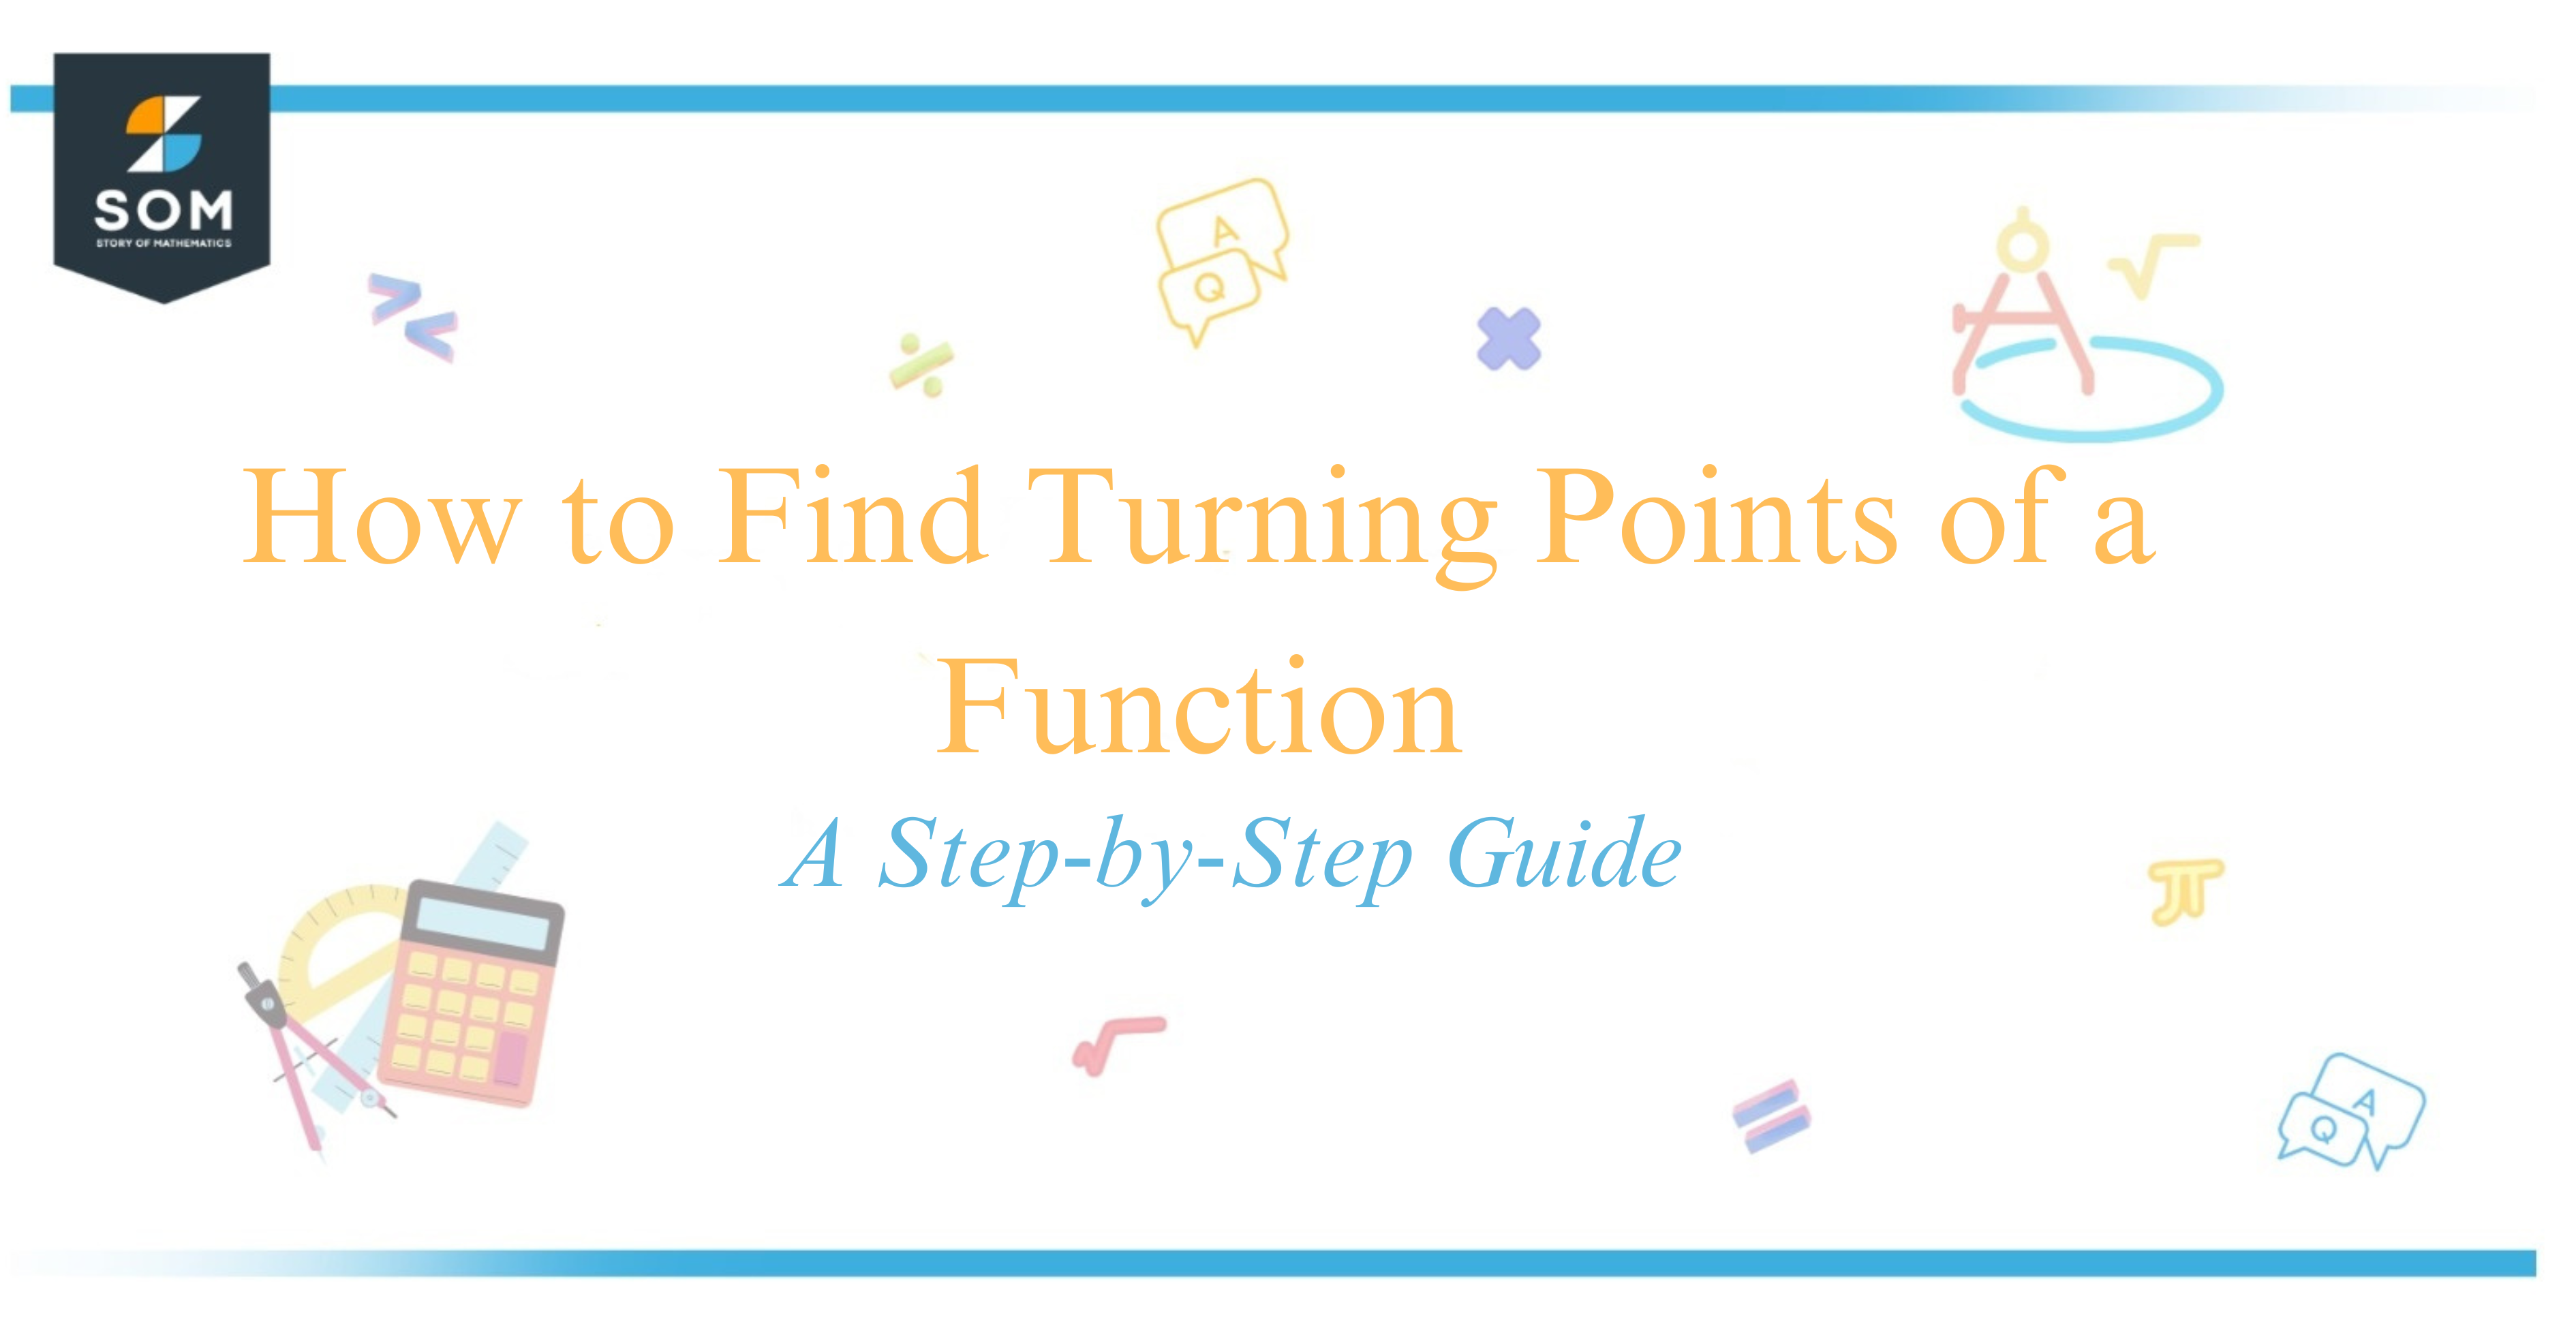 How to Find Turning Points of a Function A Step-by-Step Guide